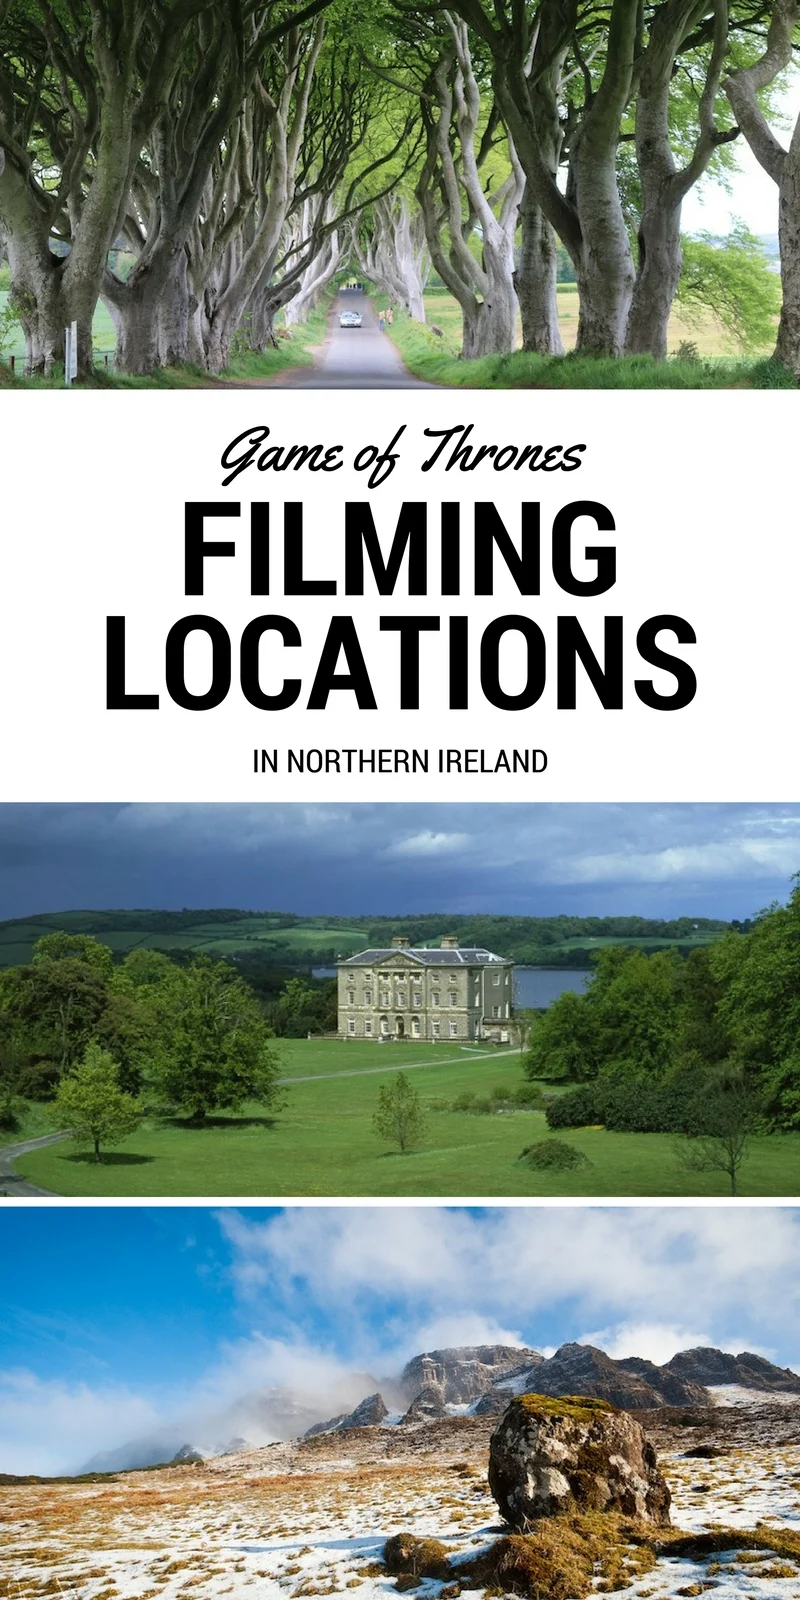 Game of Thrones film locations in Northern Ireland